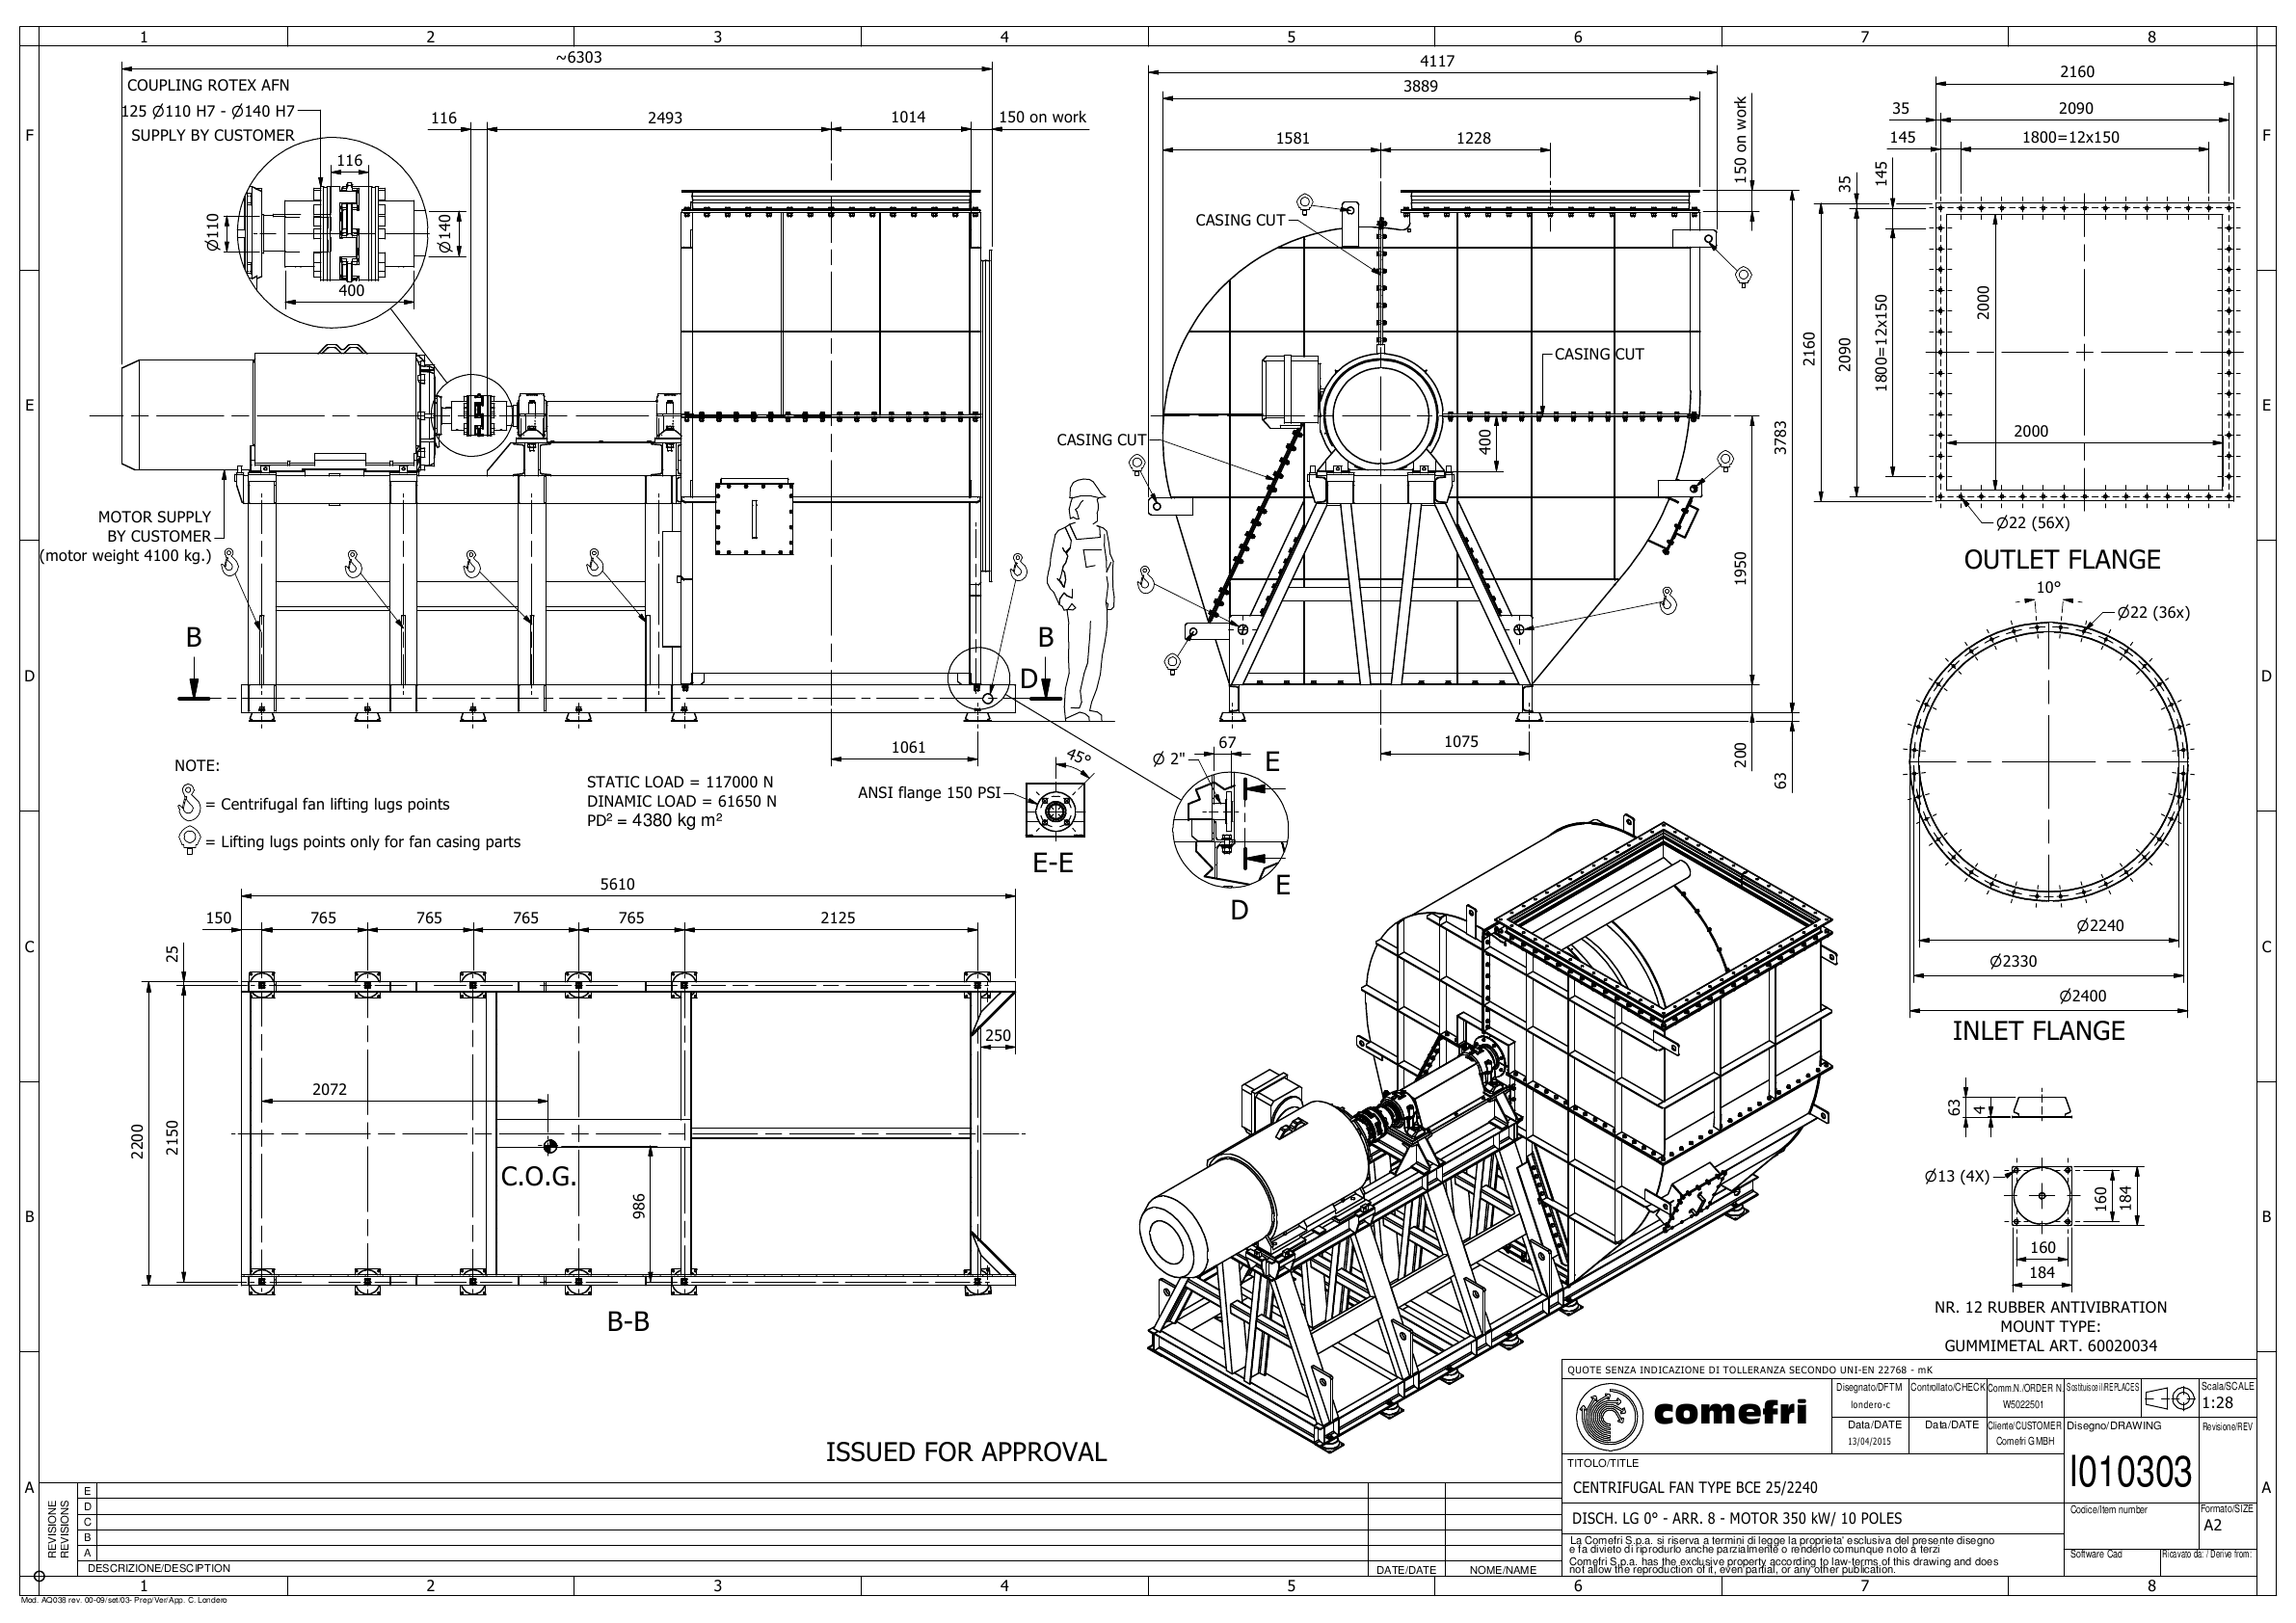 2D and 3D Cad Drawing services | Mechanical Cad design &drafting